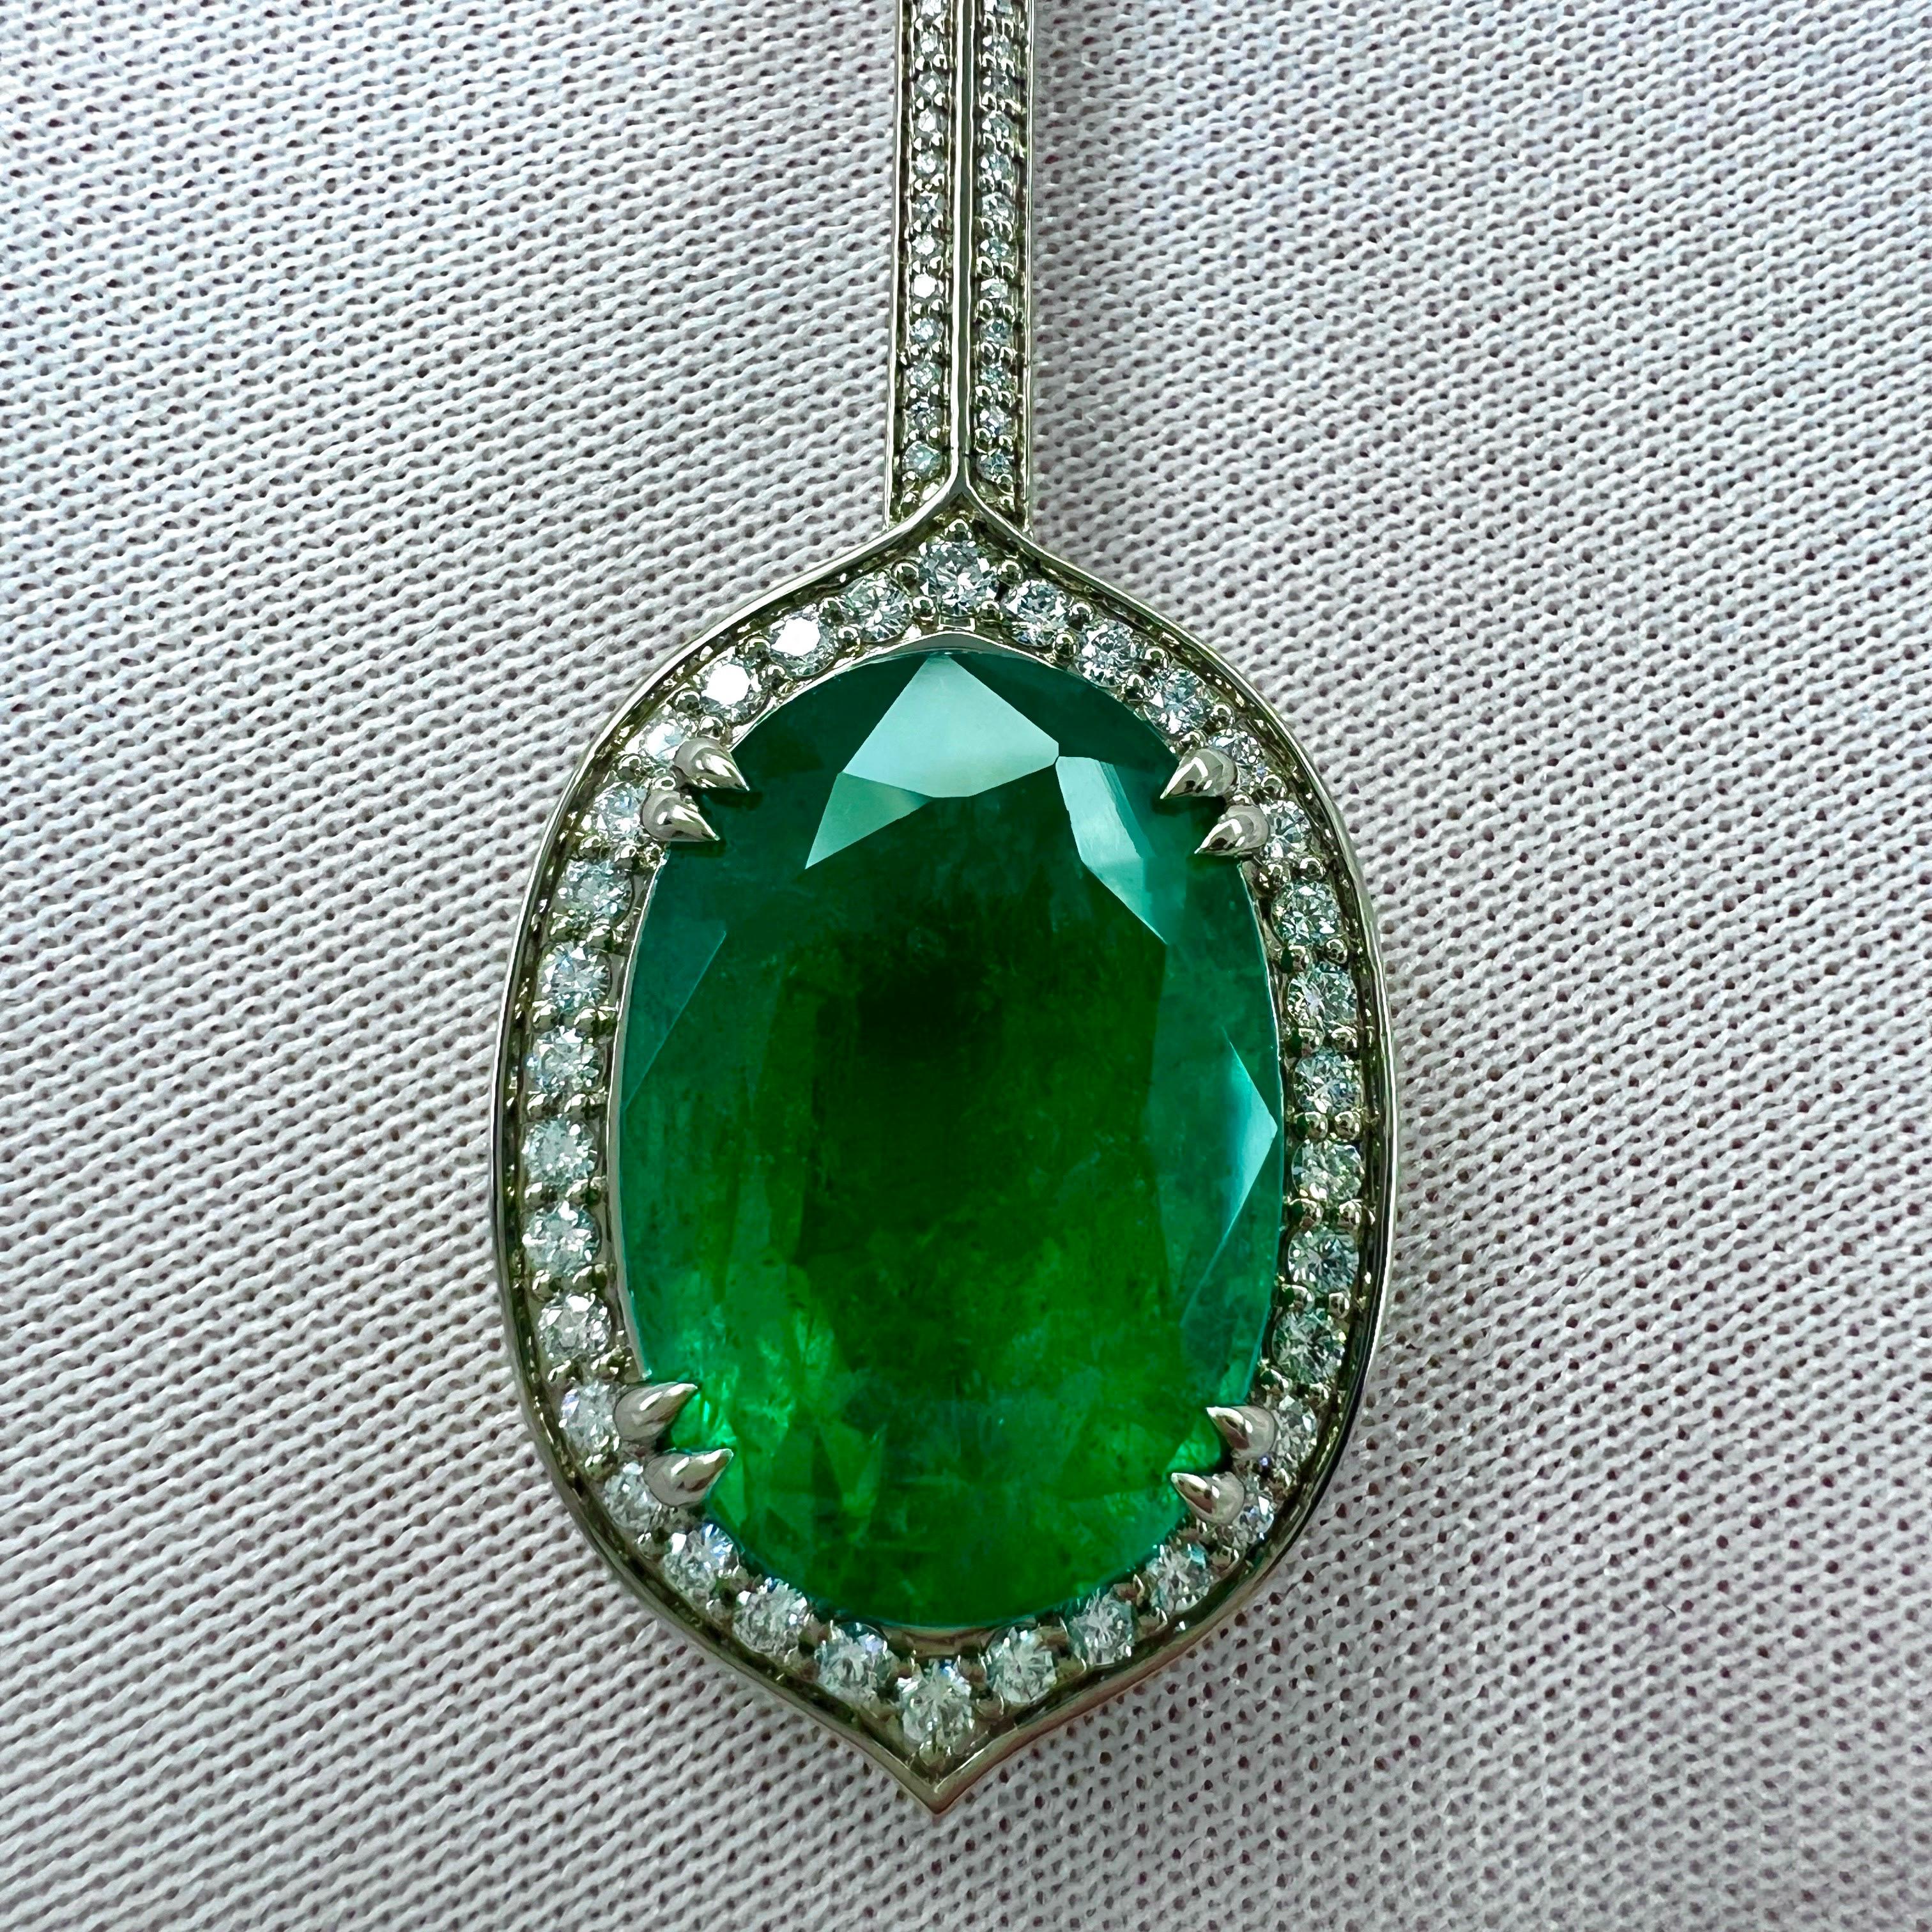 Rare And Unique Natural GIA Certified Russian Emerald & Diamond 18k White Gold Halo Pendant Necklace.

This beautiful necklace features a very rare 'old stock' Russian emerald. These emeralds are exceptionally rare and hardly ever make it to the